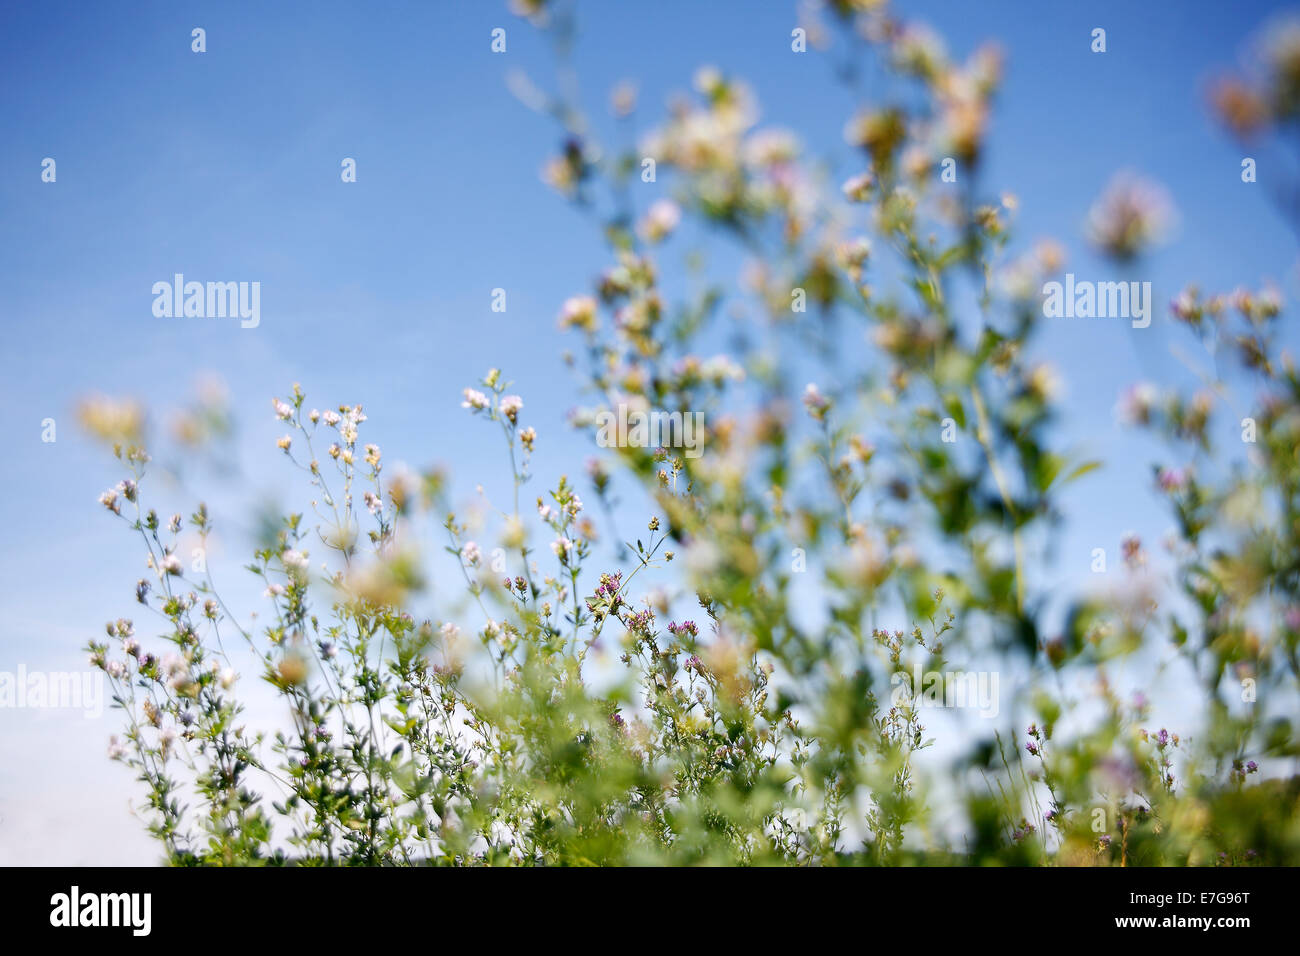 Awakening of plants and flowers in the nature in spring Stock Photo